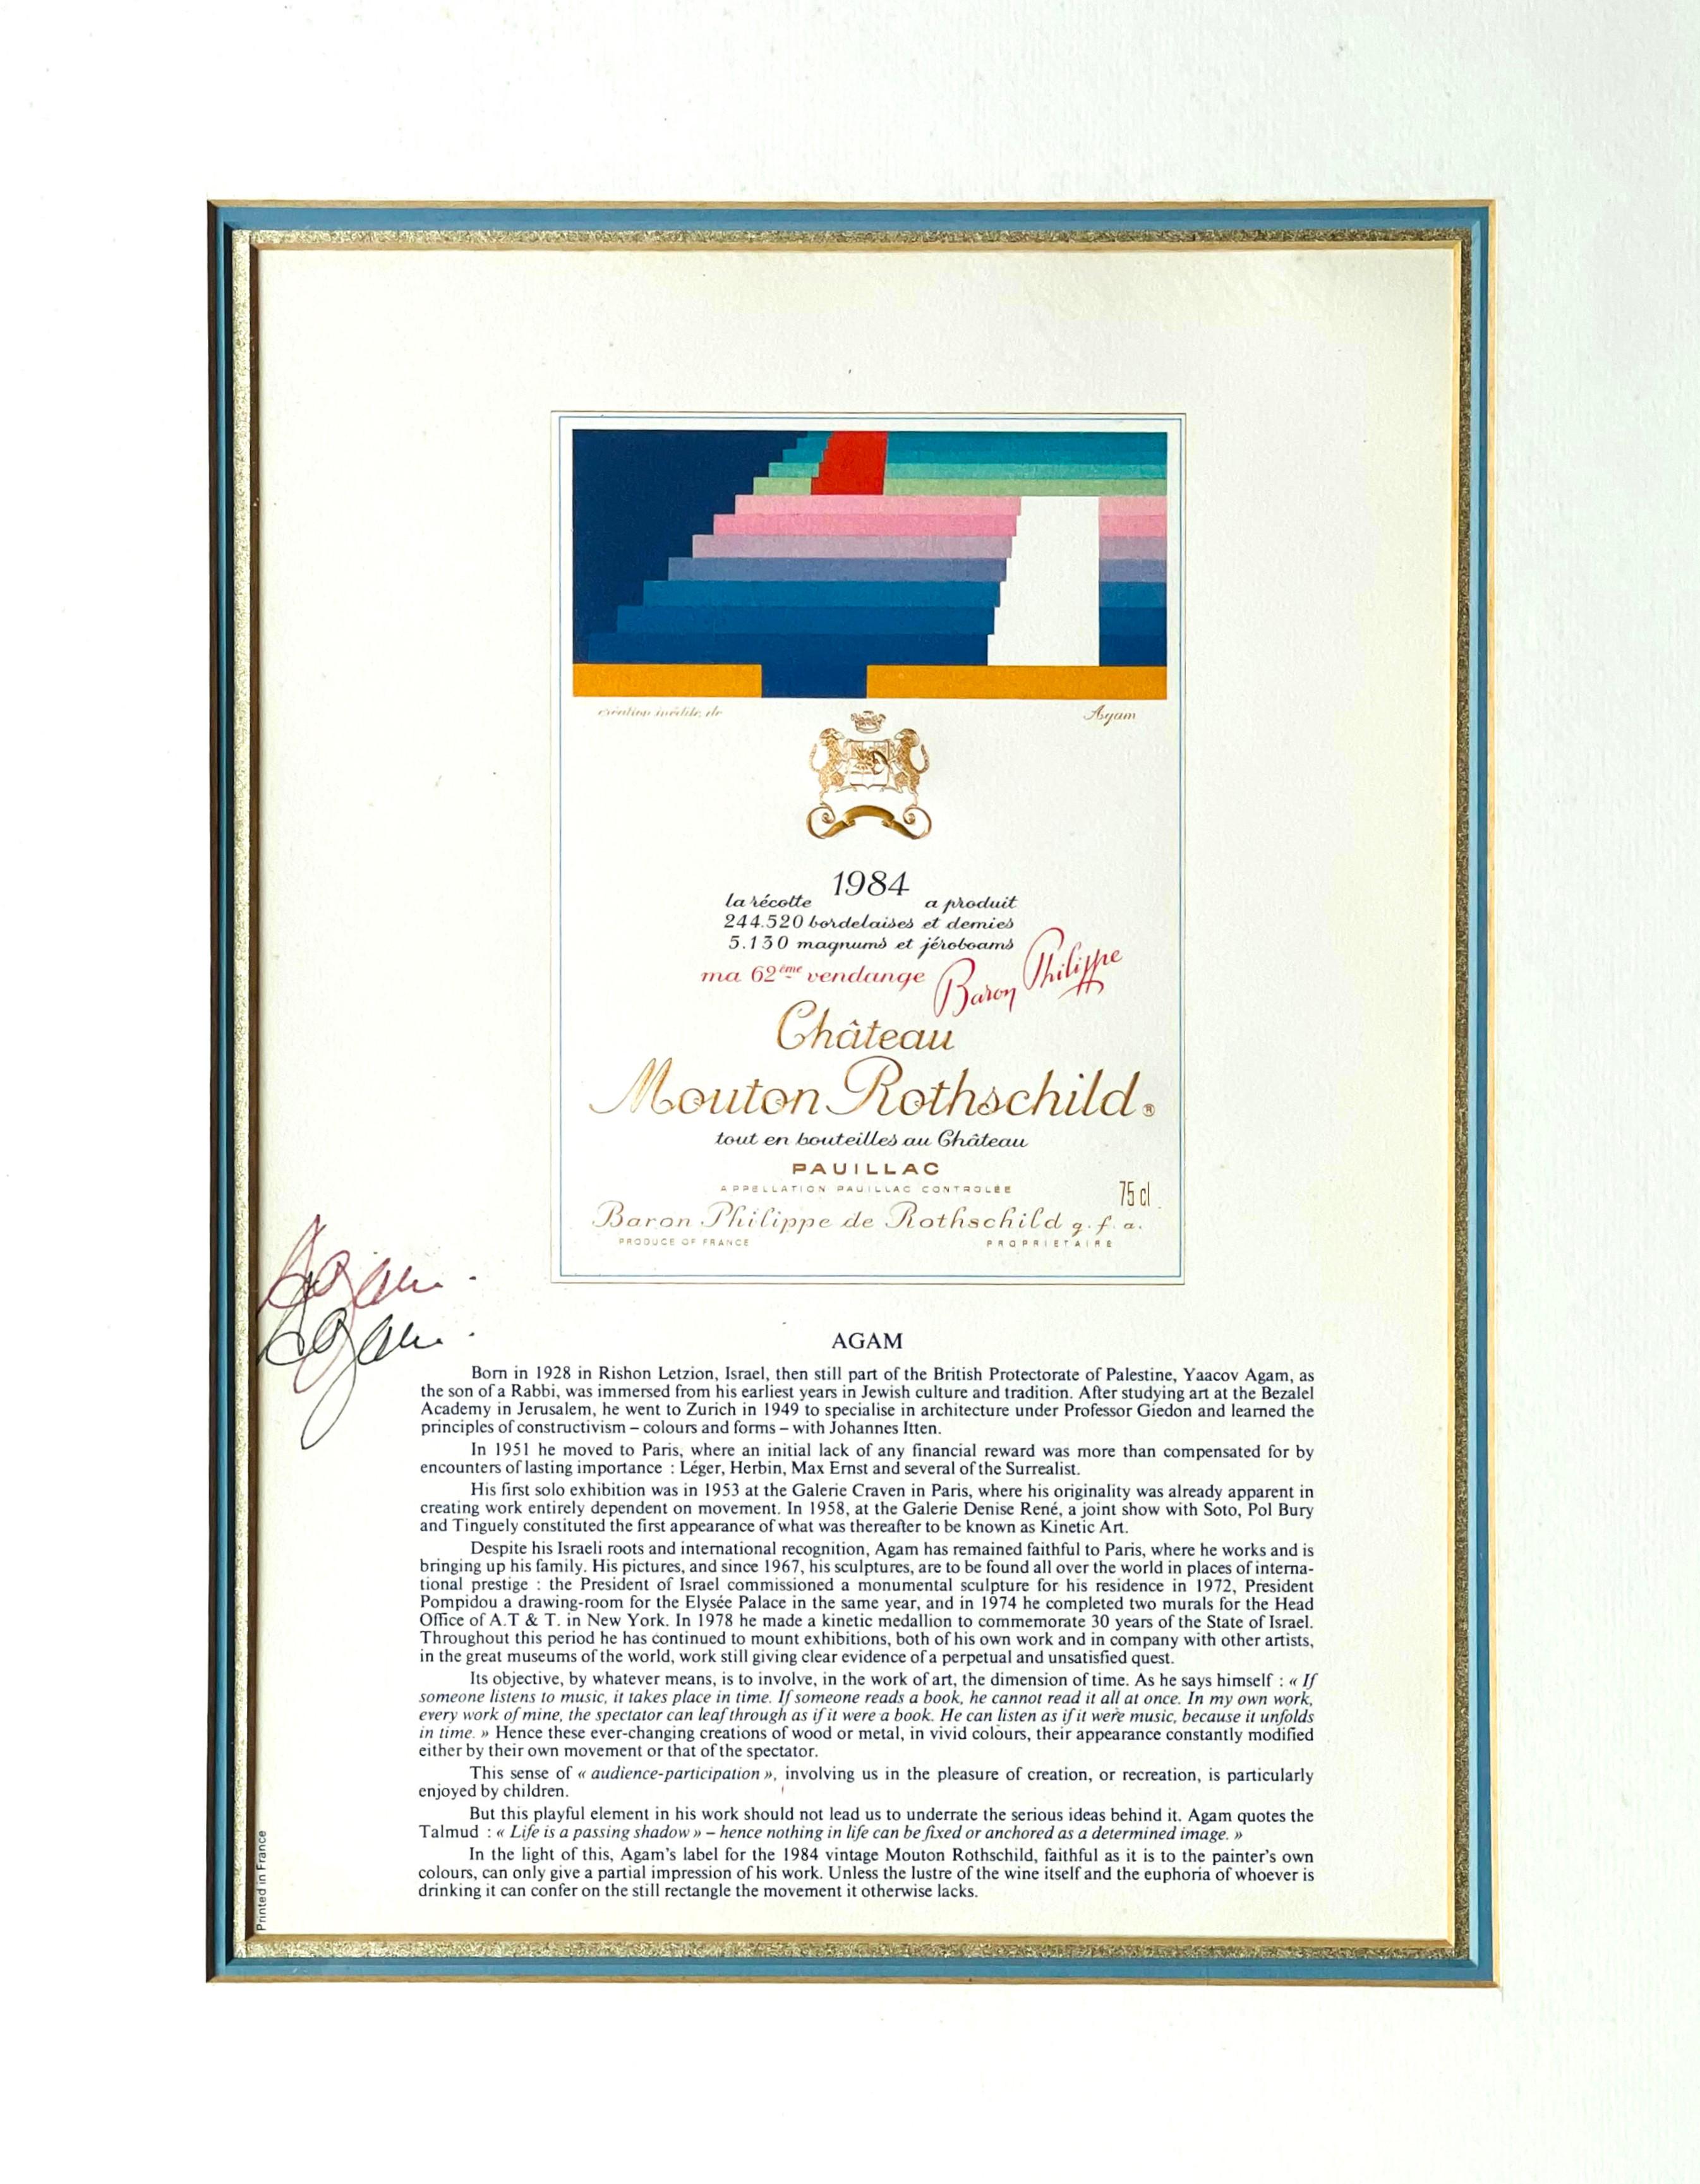 Yaacov Agam Abstract Print - Chateau Mouton Rothschild label (hand signed)